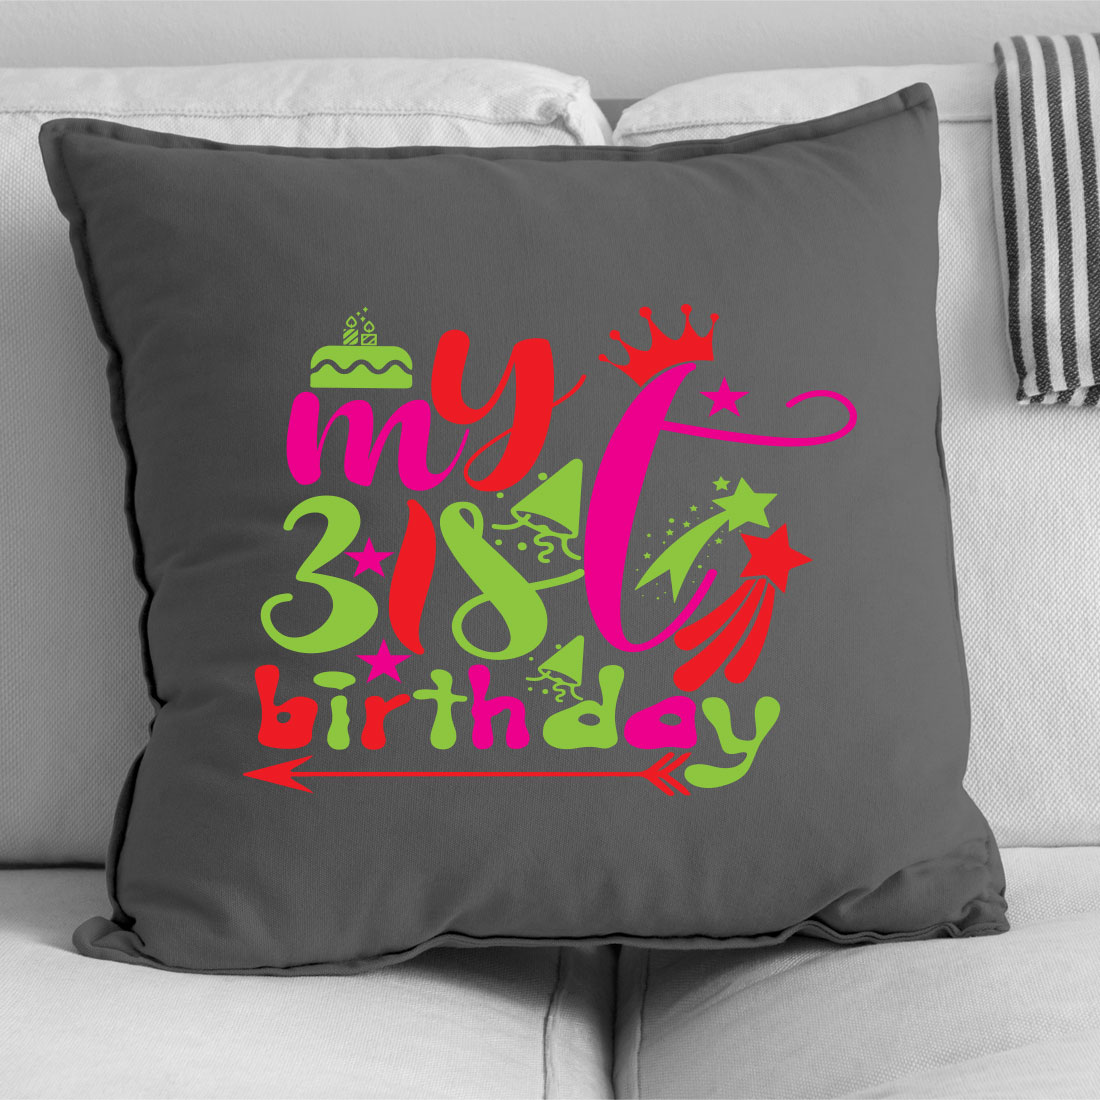 Gray pillow with a pink and green design on it.